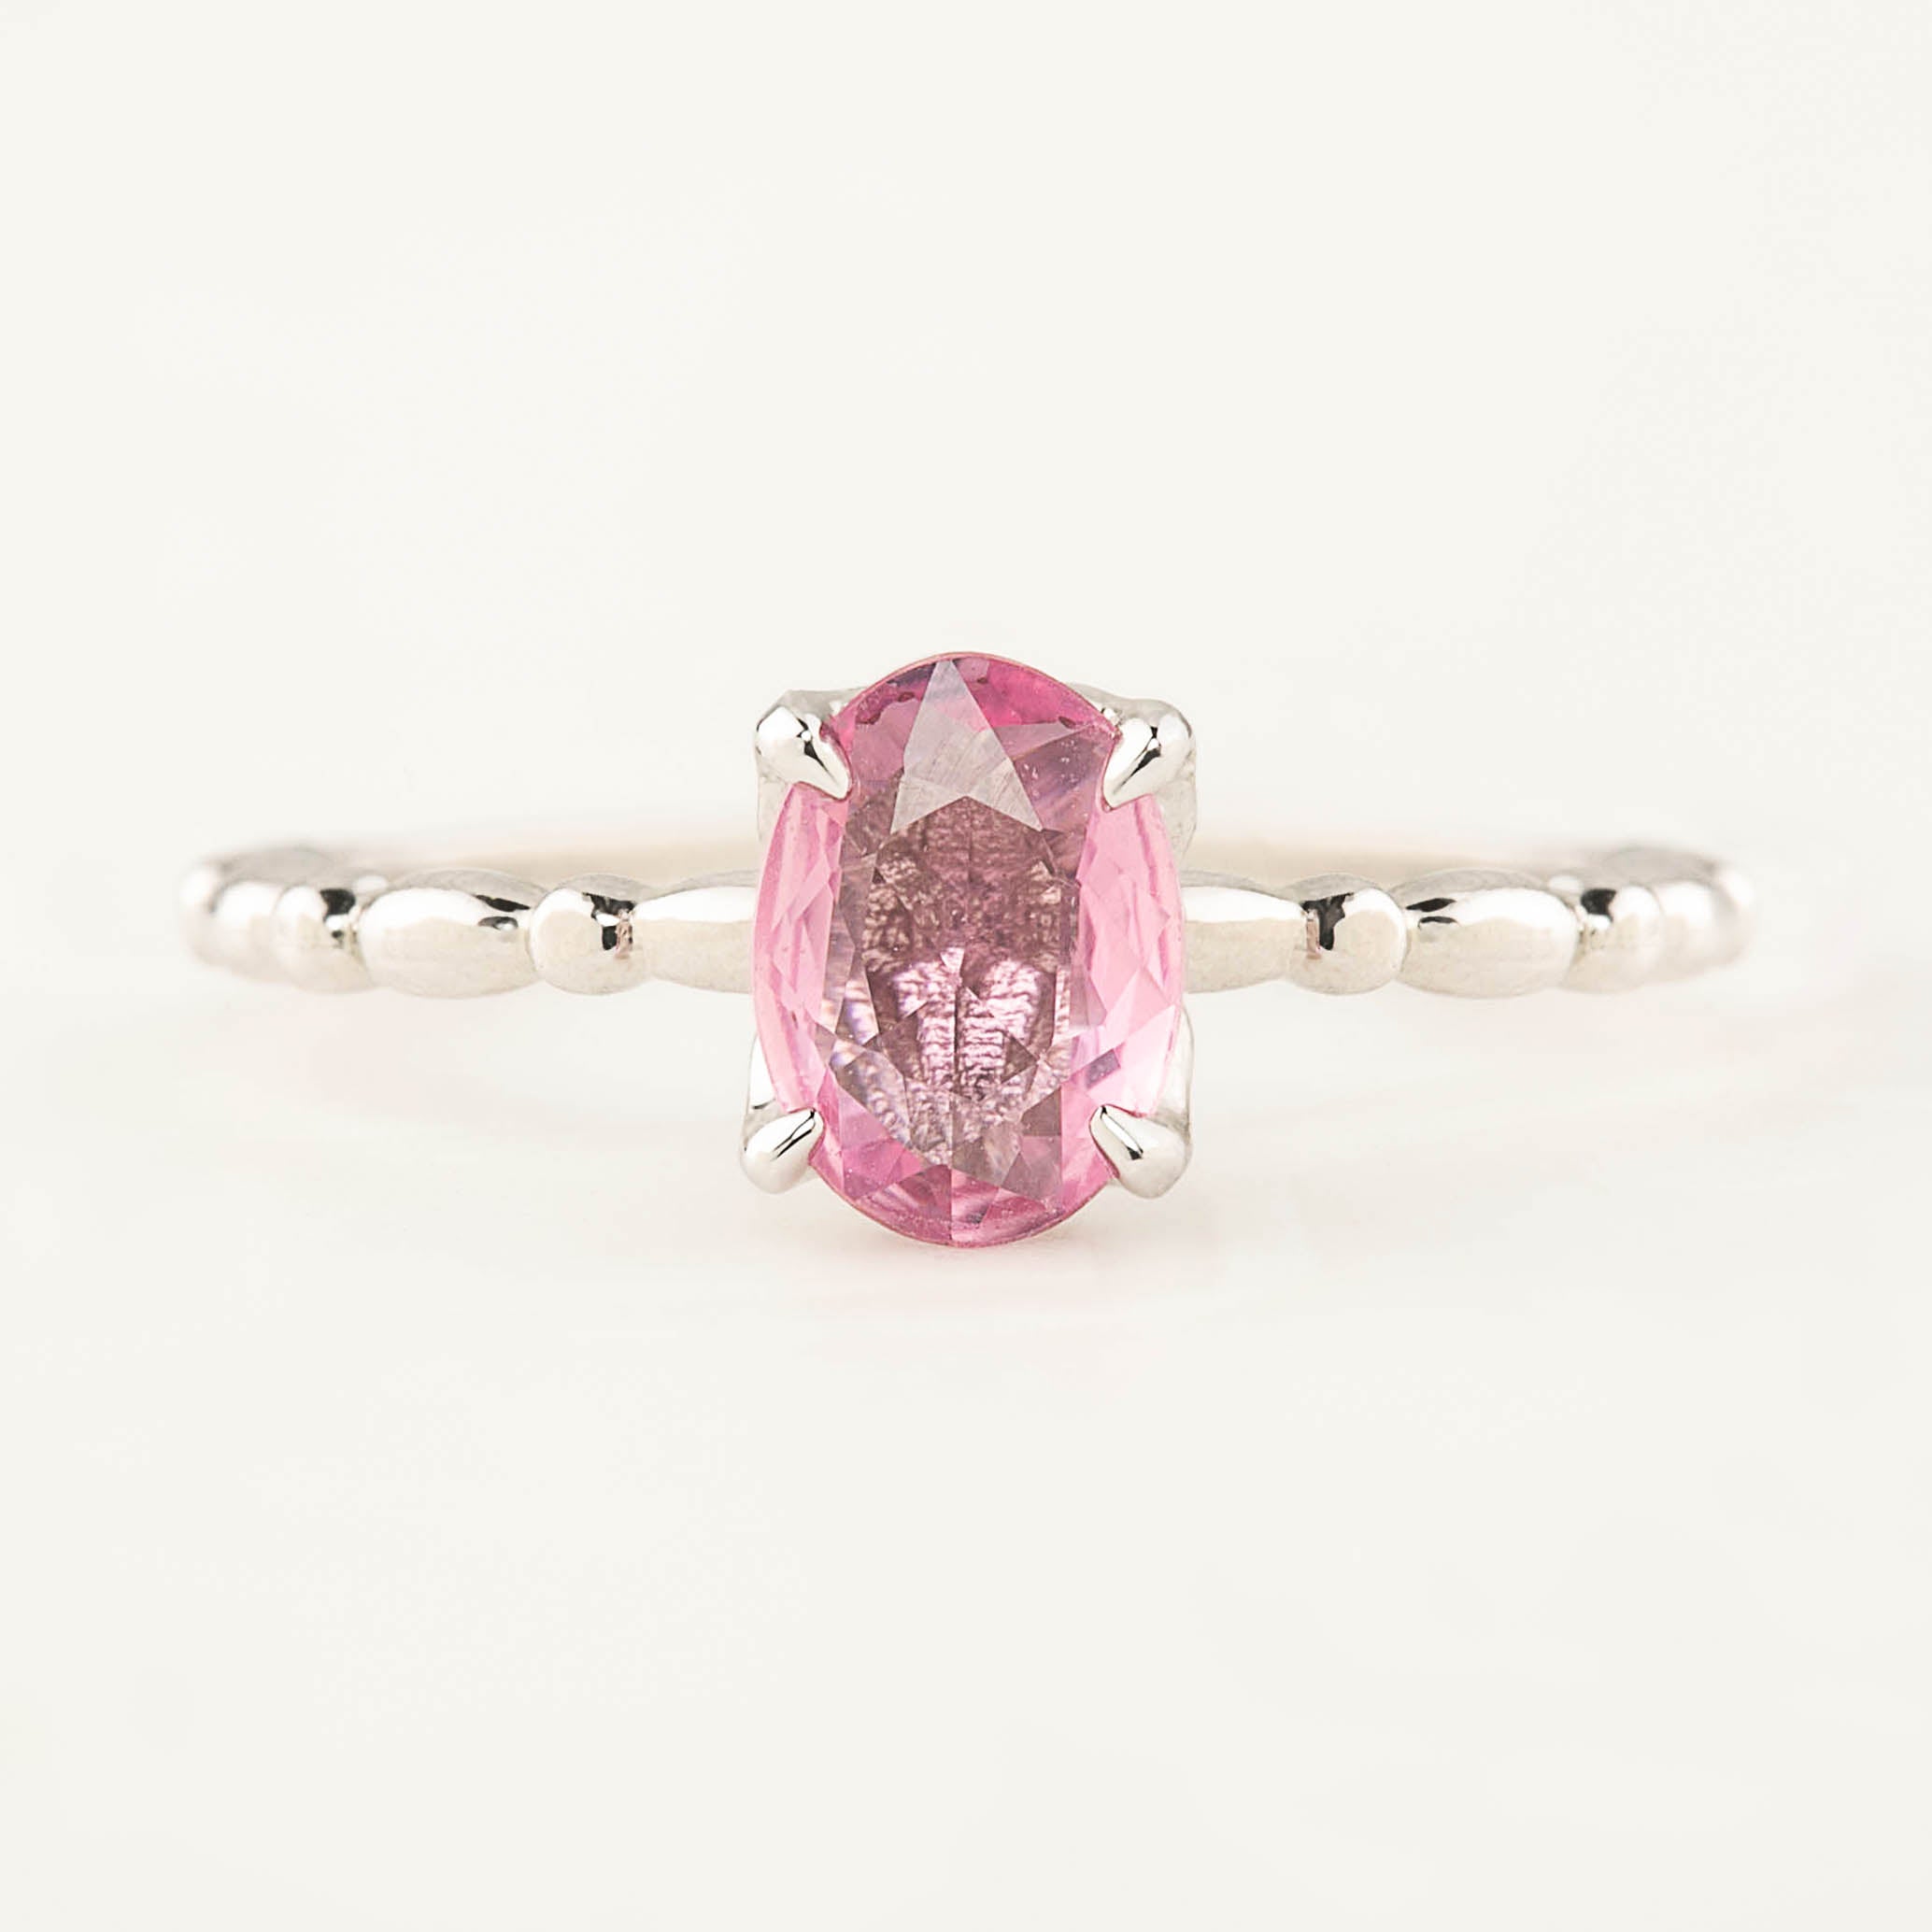 Delicate Rose Gold Ring Featuring a Light Pink Crystal | Cotton Candy by  Oomiay – Oomiay Jewelry